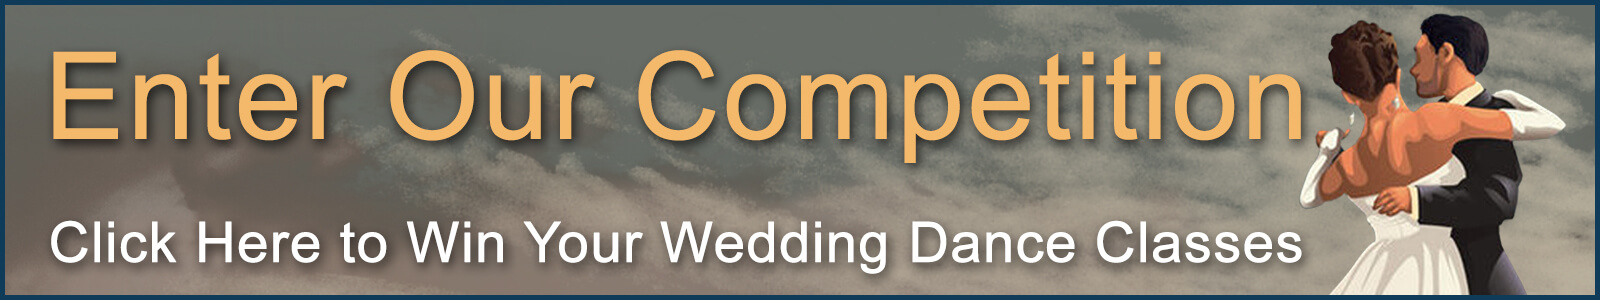 win your wedding dance lessons - in our Competition